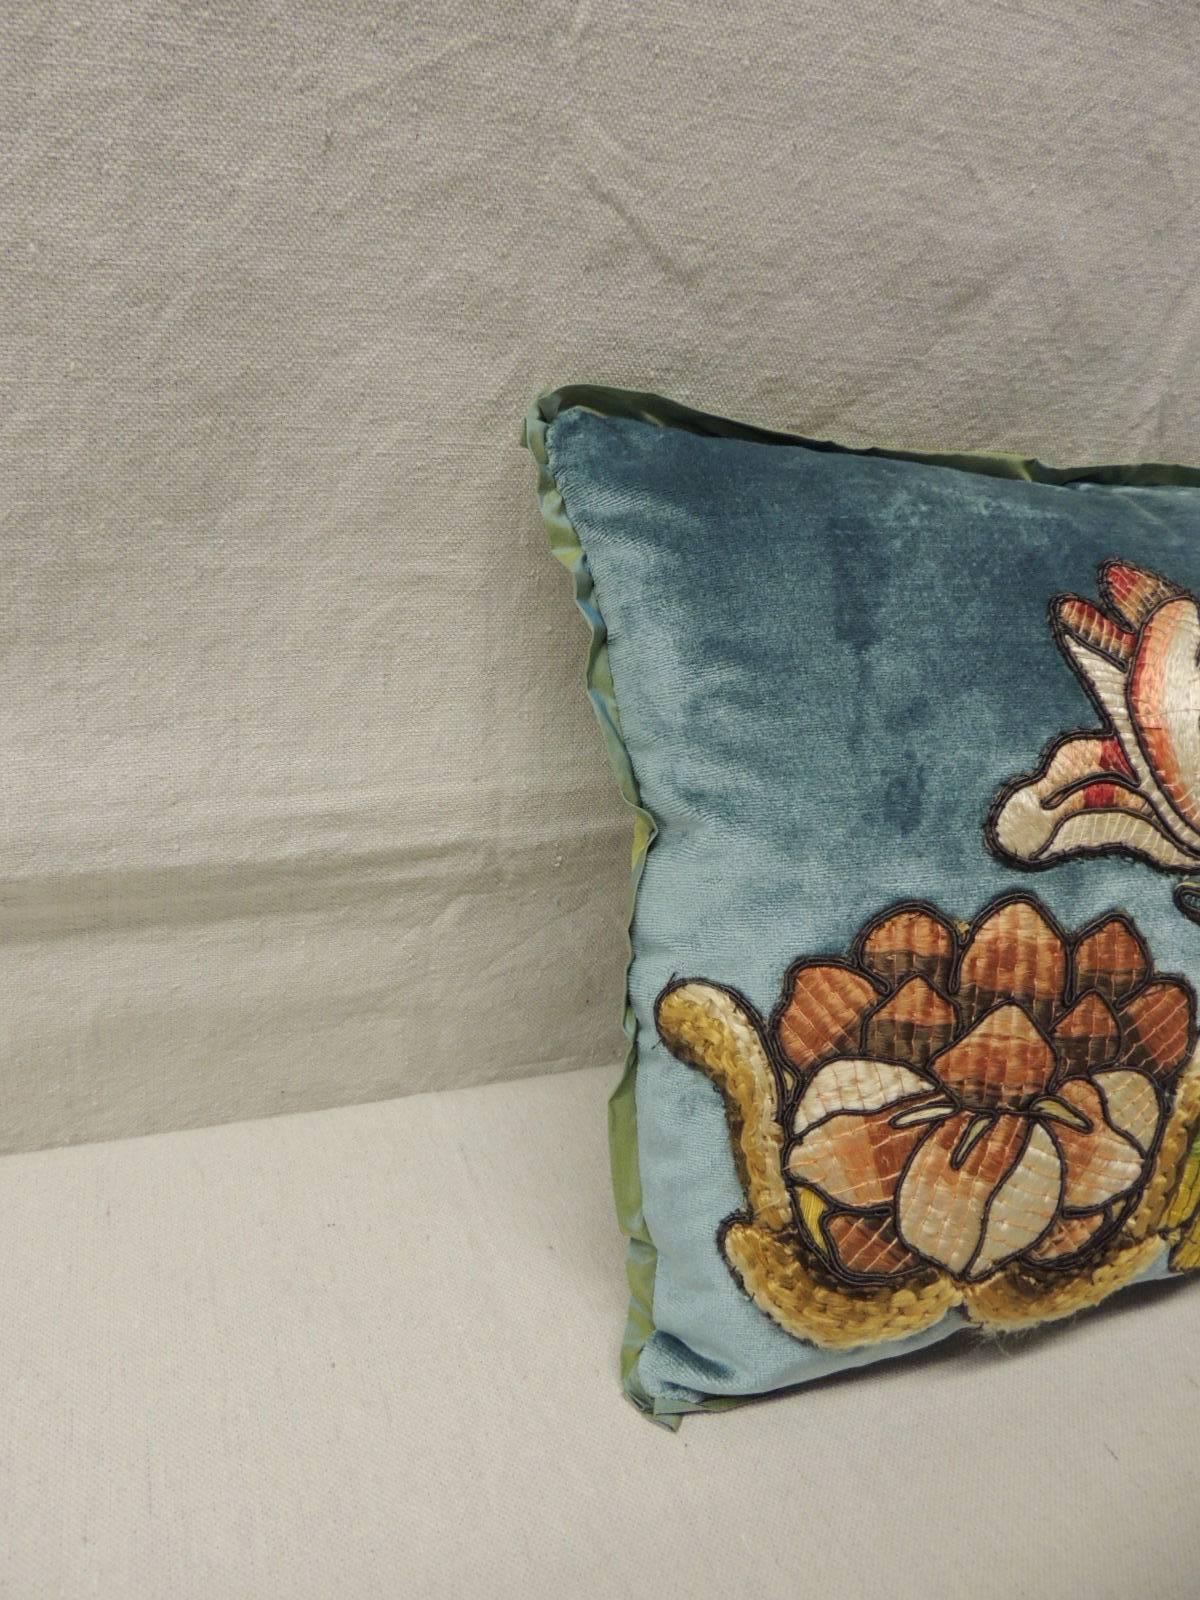 Antique Textiles Galleries...
18th century petite lumbar appliqué pillow. Silk embroidery detail re-applied onto silk velvet. Soft green silk trim and backing. Floral design in shades of green, blue, brown, gold, orange, red and aqua.
Pillow